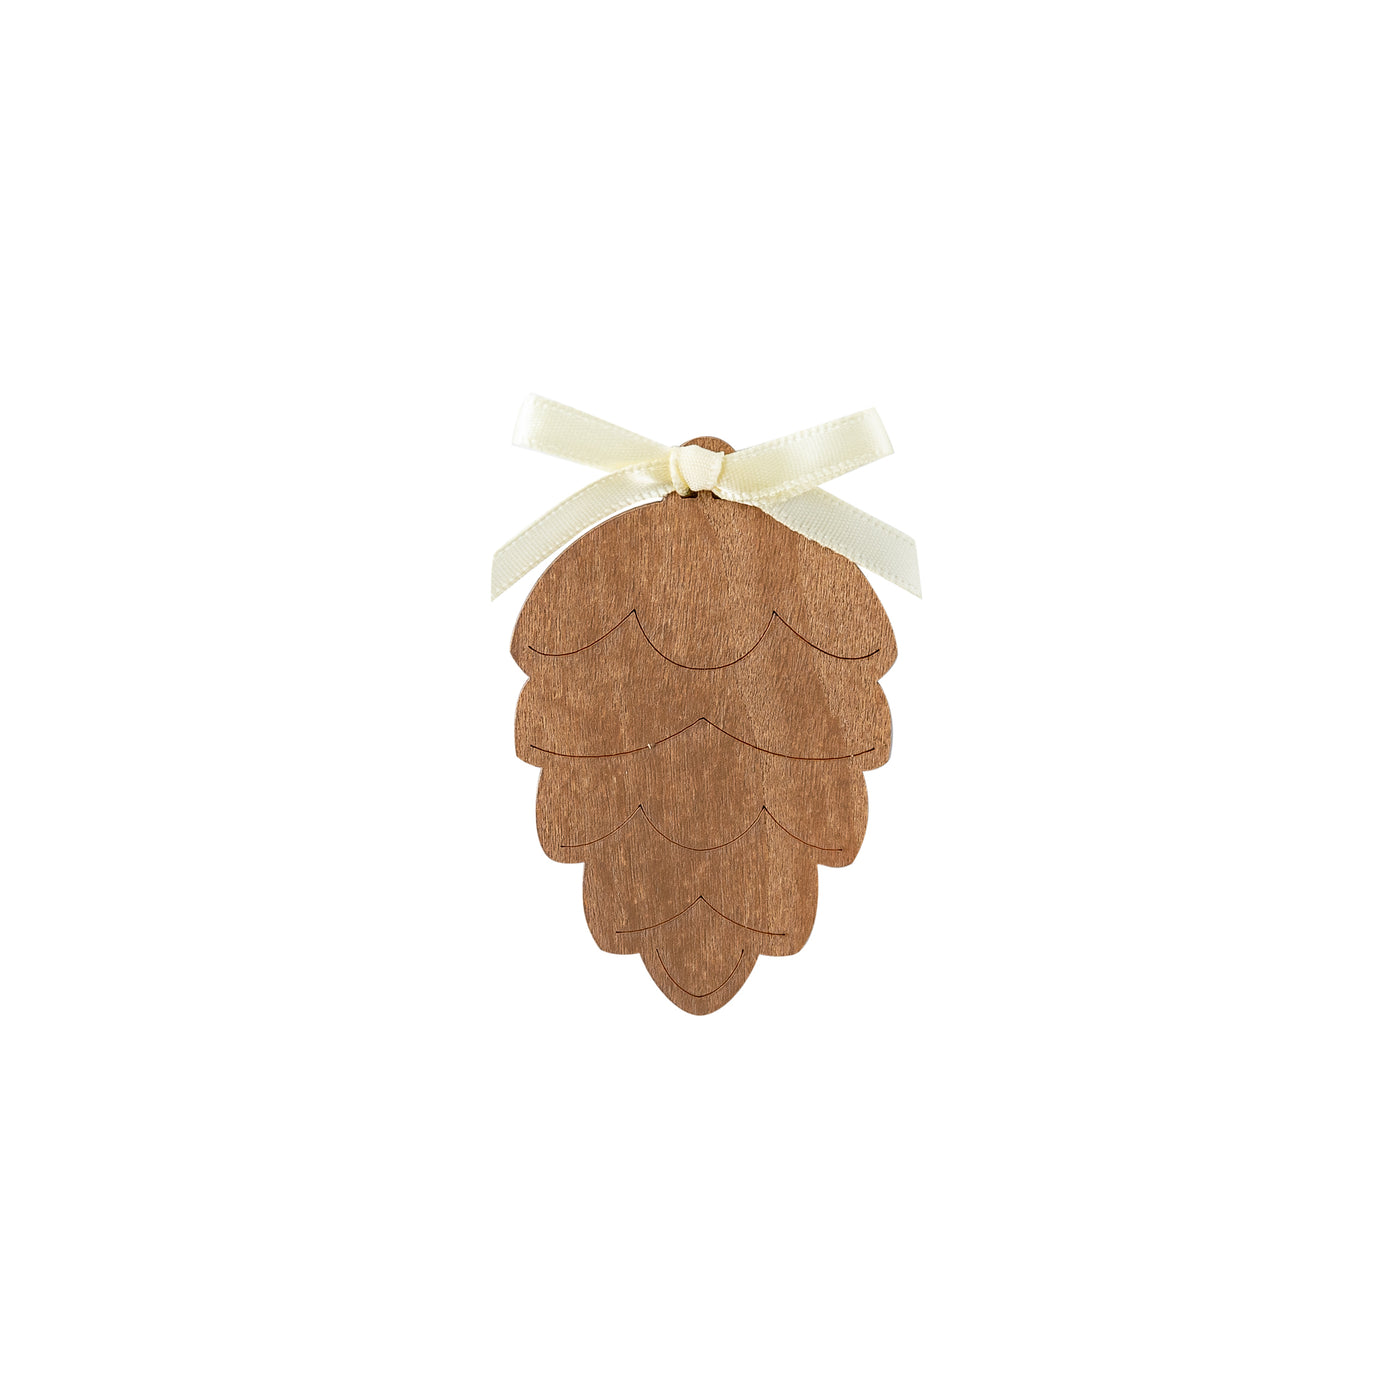 THP916 - Harvest Wooden Pine Cone Napkin Tags